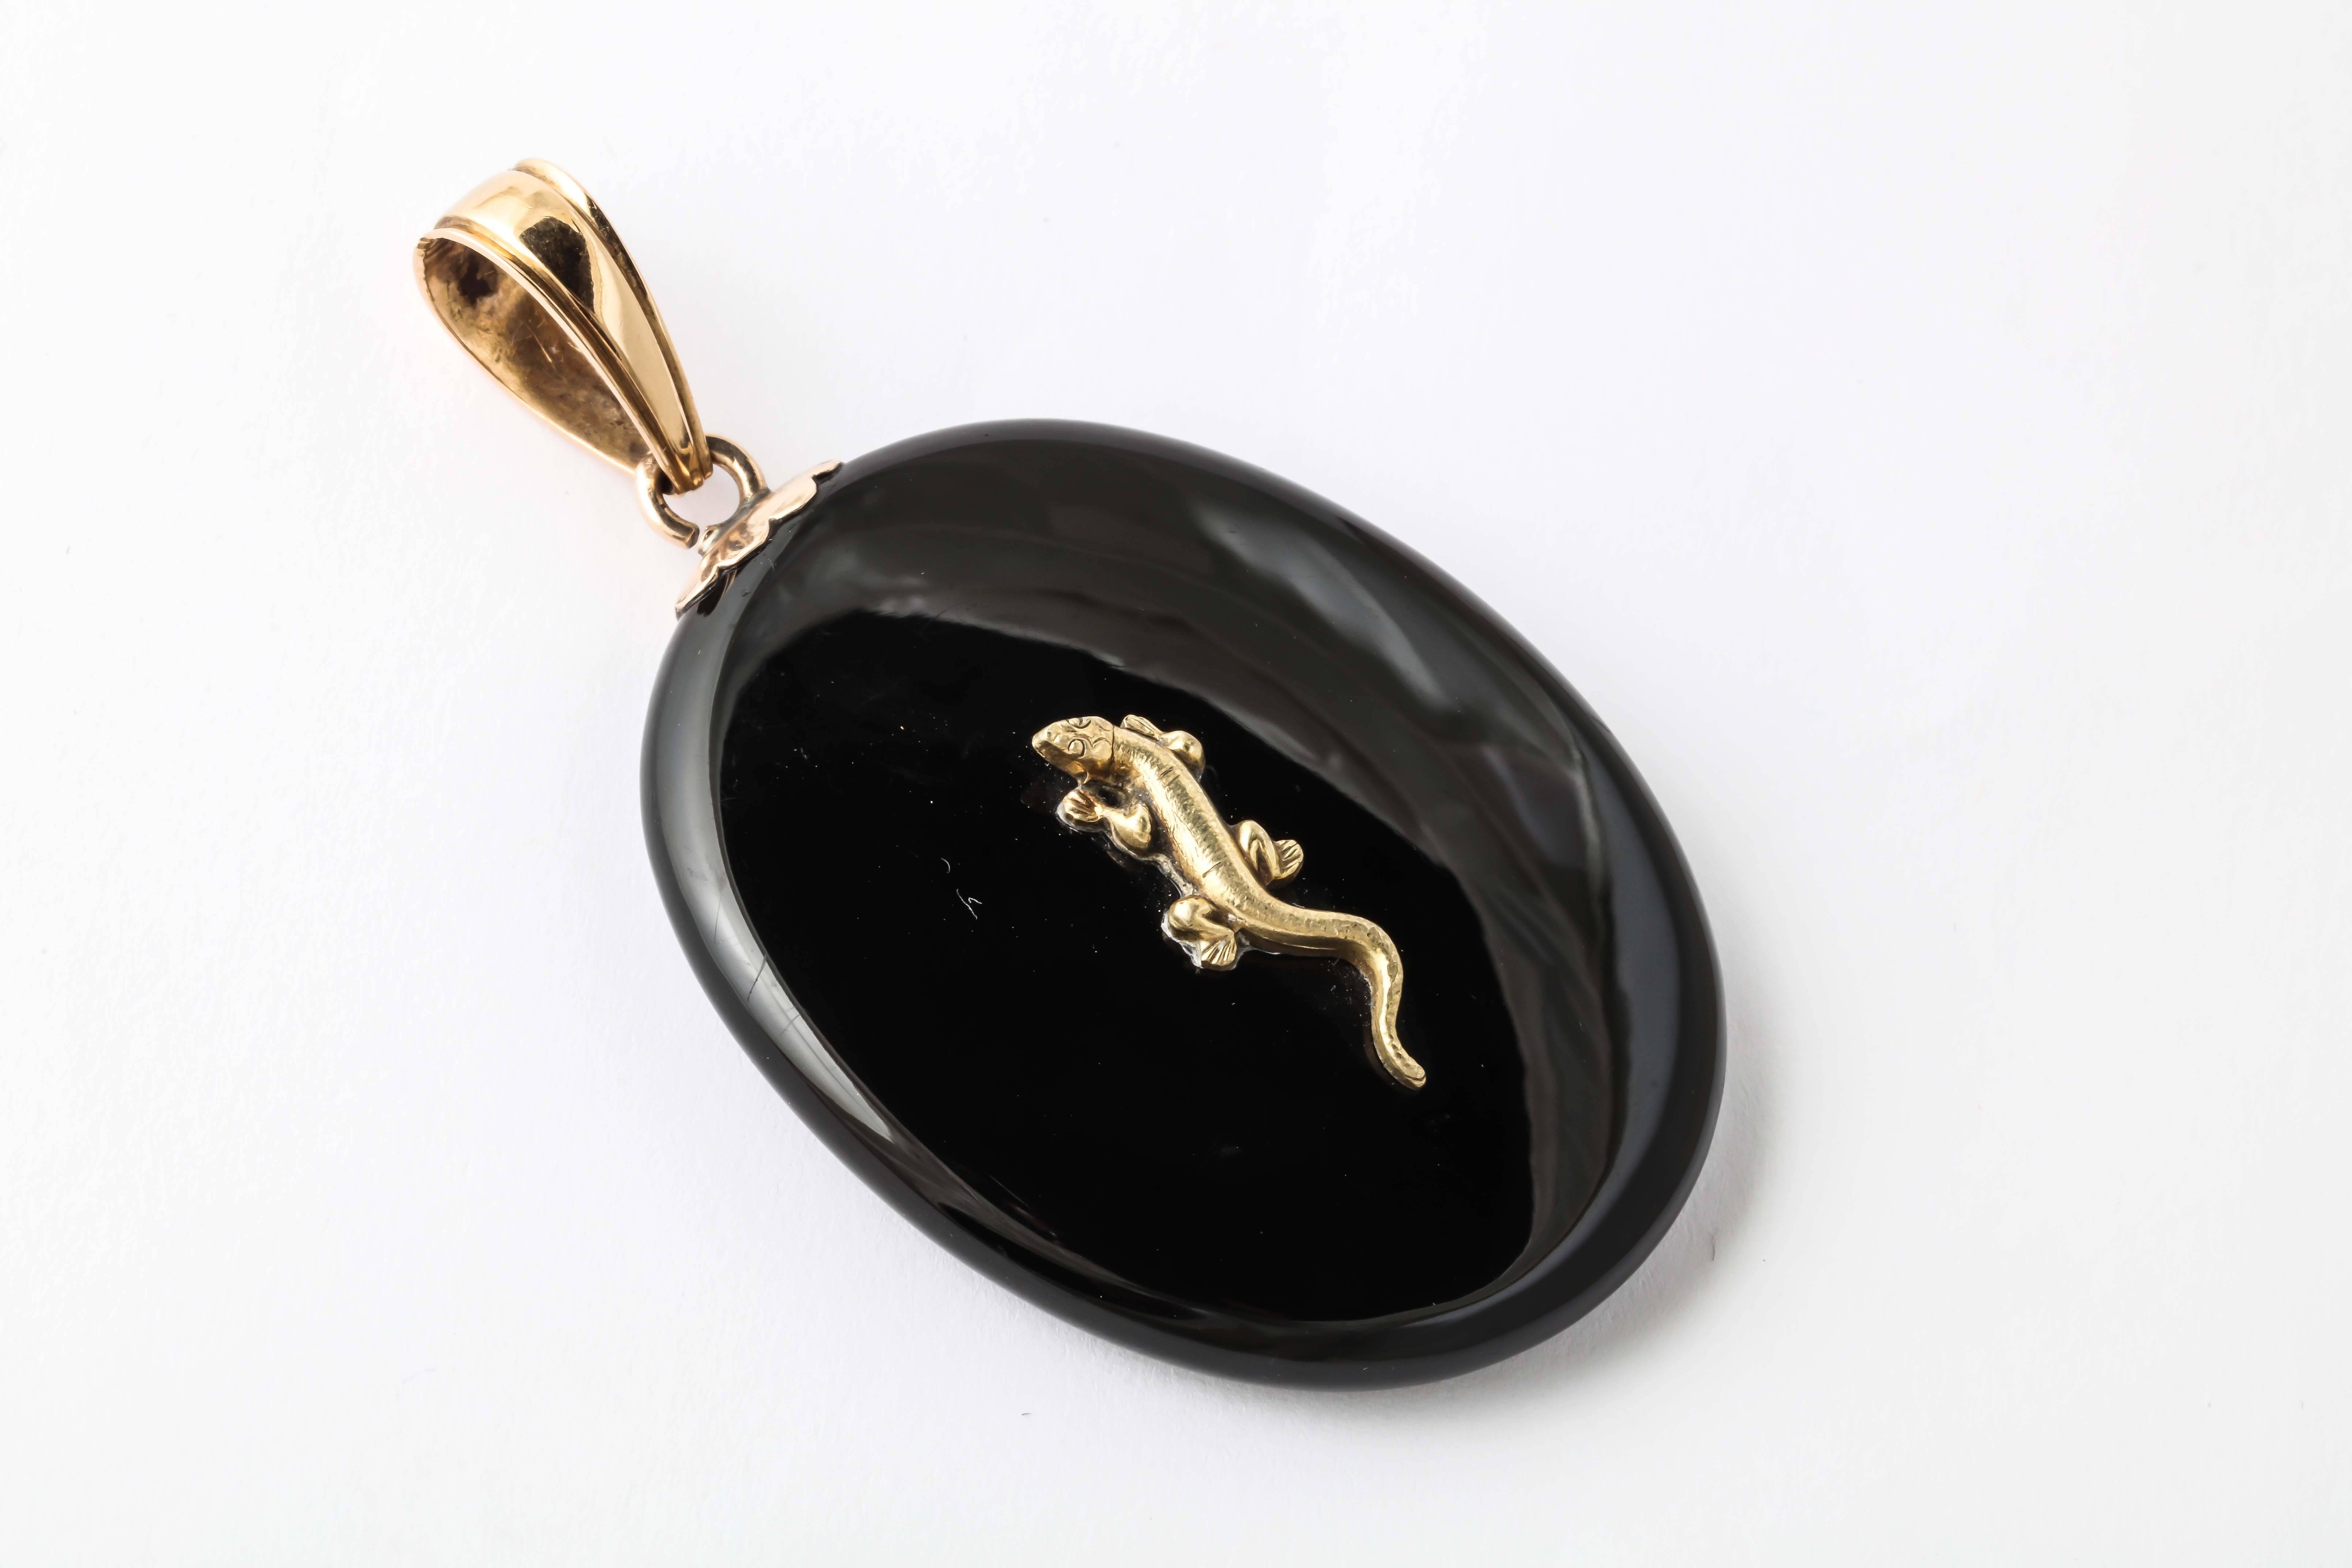 This charming locket is made of Jet and 15K gold. The best Jet was found off the coast in England. It is very tightly compressed wood that has fossilized over millions of years. It is lightweight, durable, and has a high sheen when polished. As